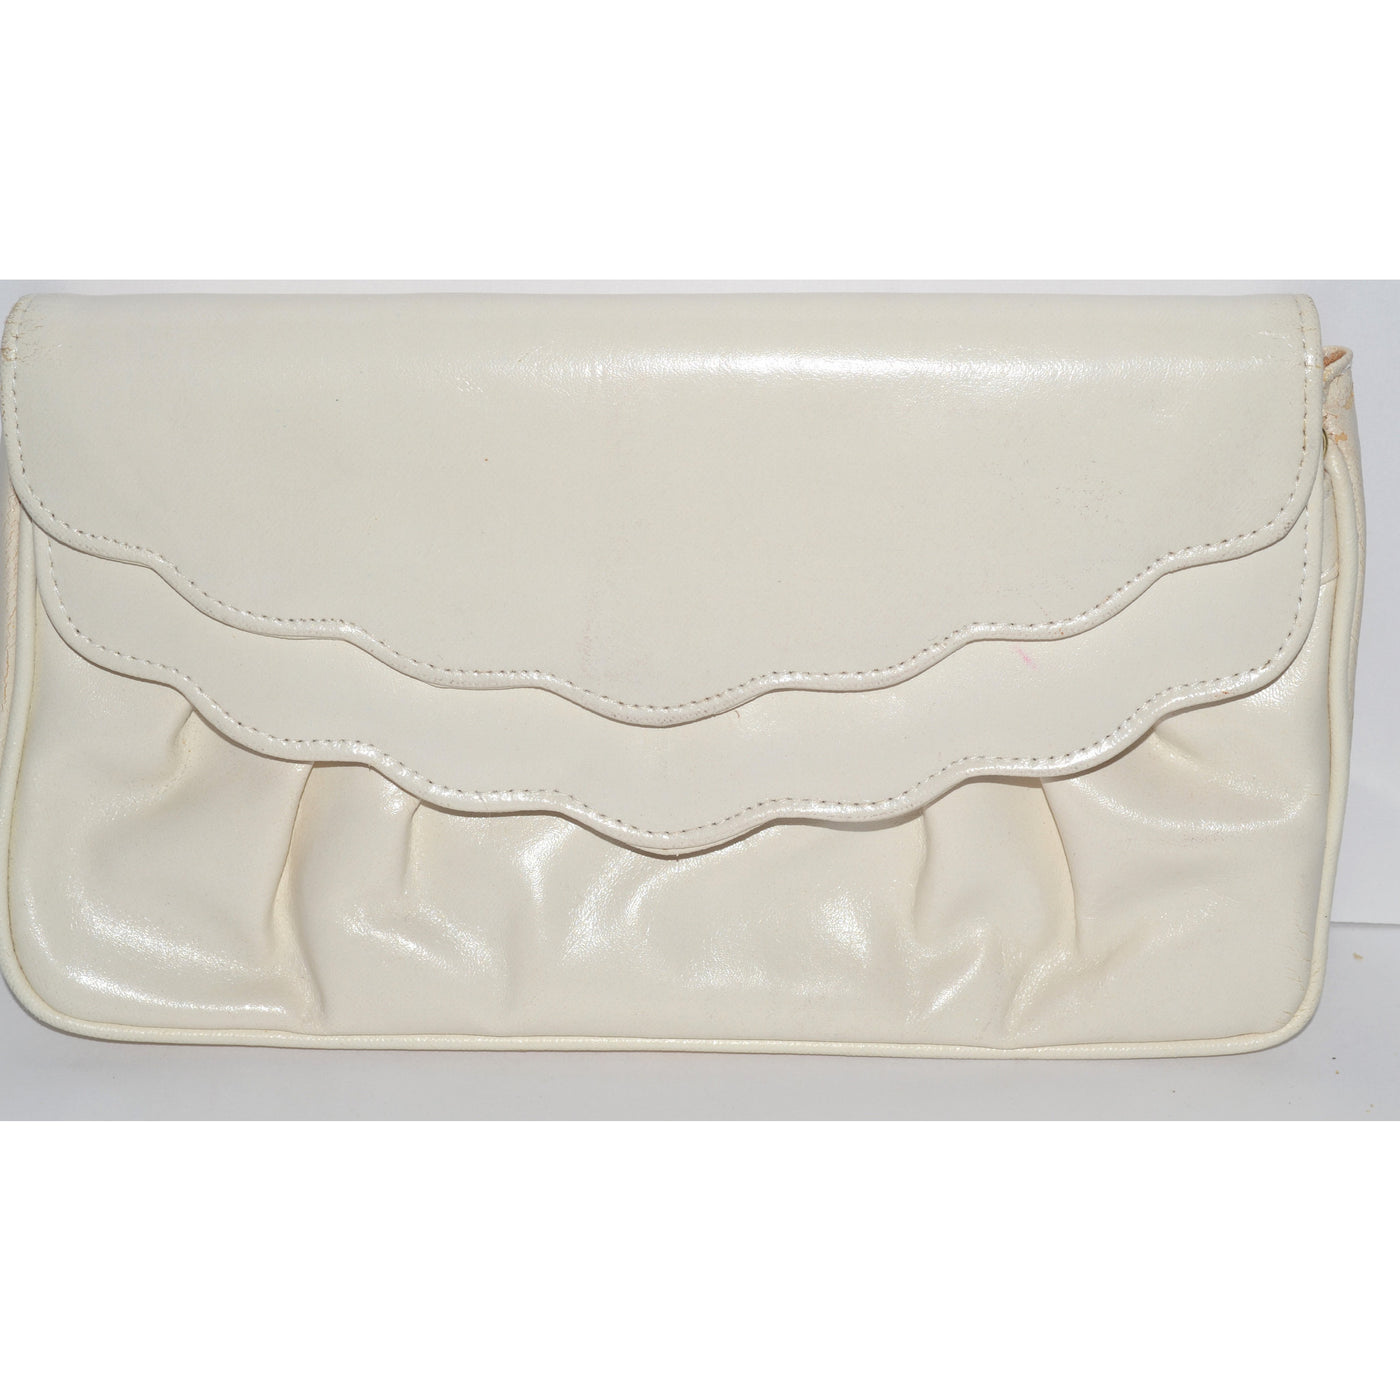 Vintage Off White Leather Clutch Purse